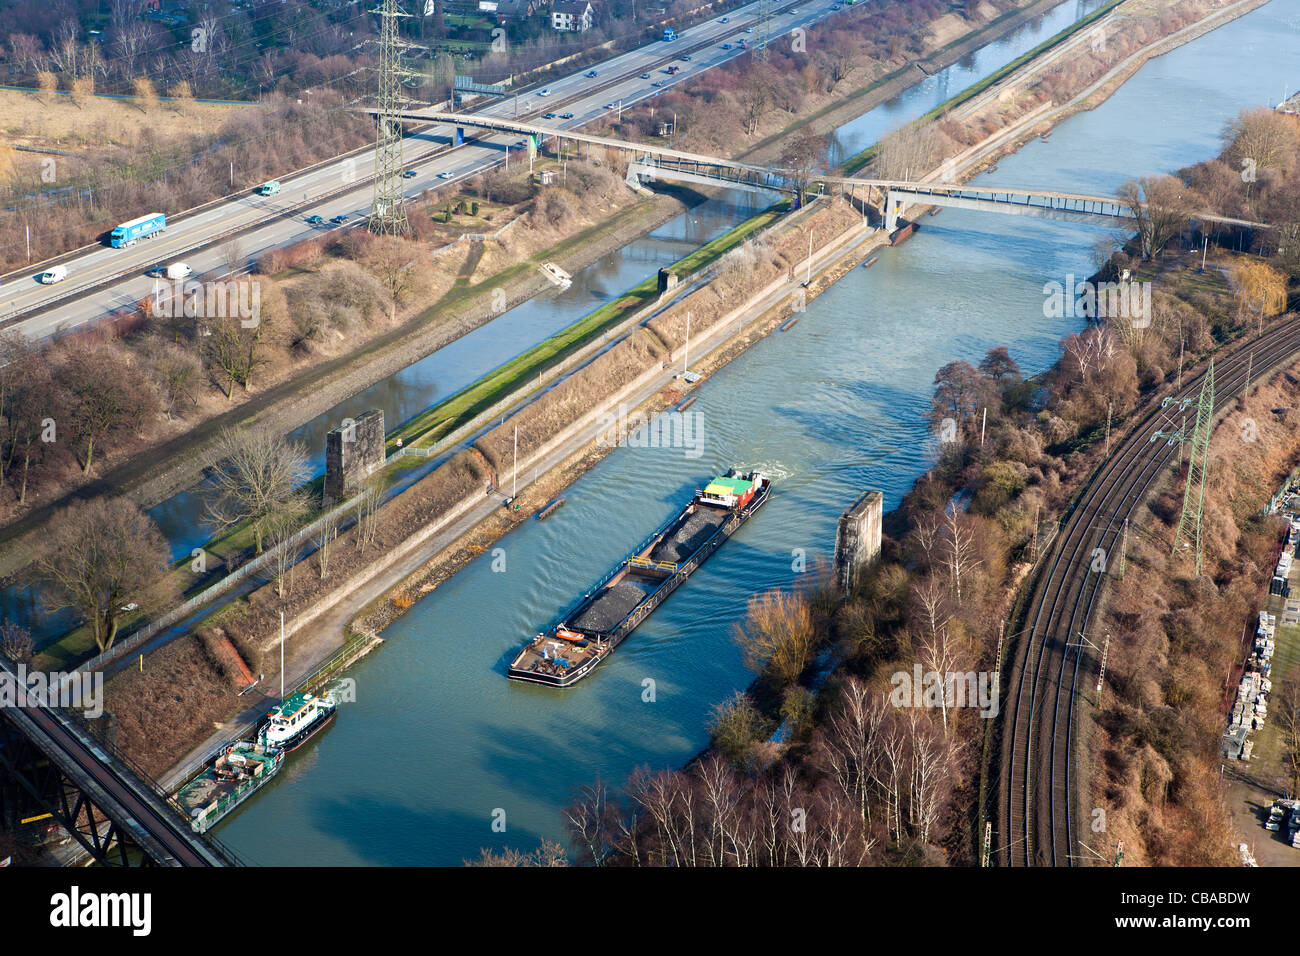 River Rhine along with train and motorway transport links near Bochum in the Ruhr area of North Rhine-Westphalia, Germany Stock Photo